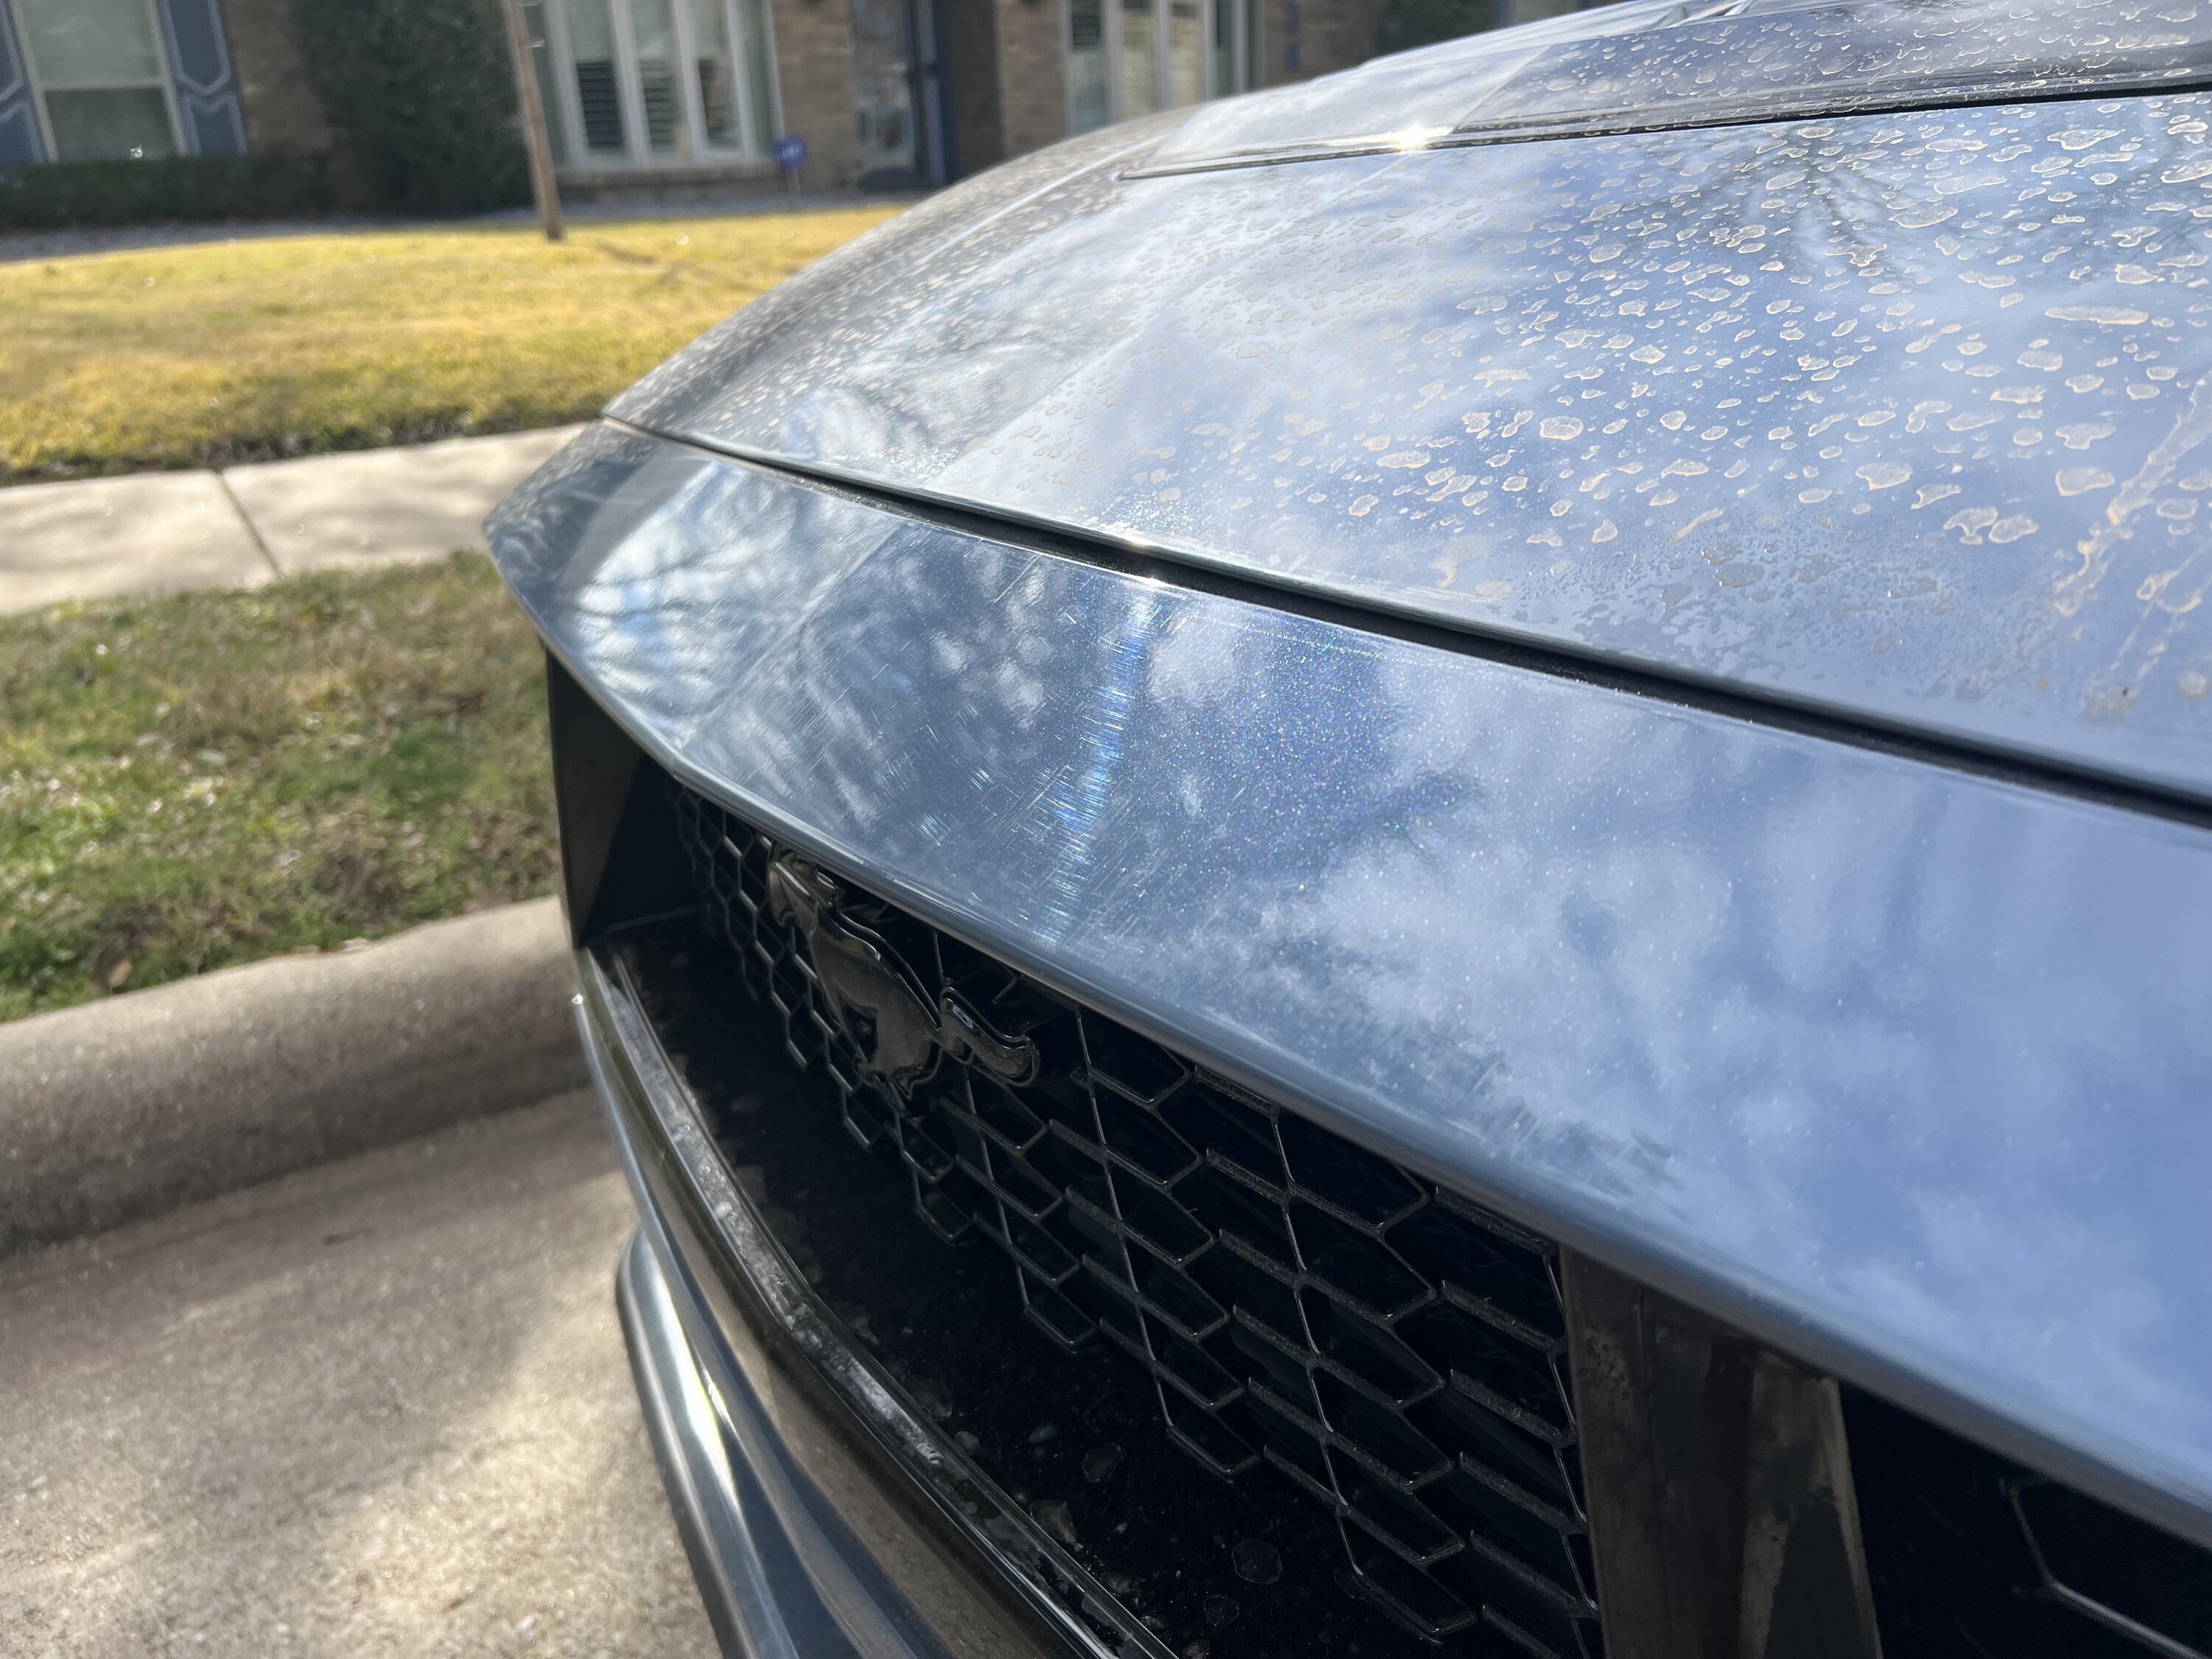 S650 Mustang Got backed into, how bad does the damage look? Next steps? IMG_6762